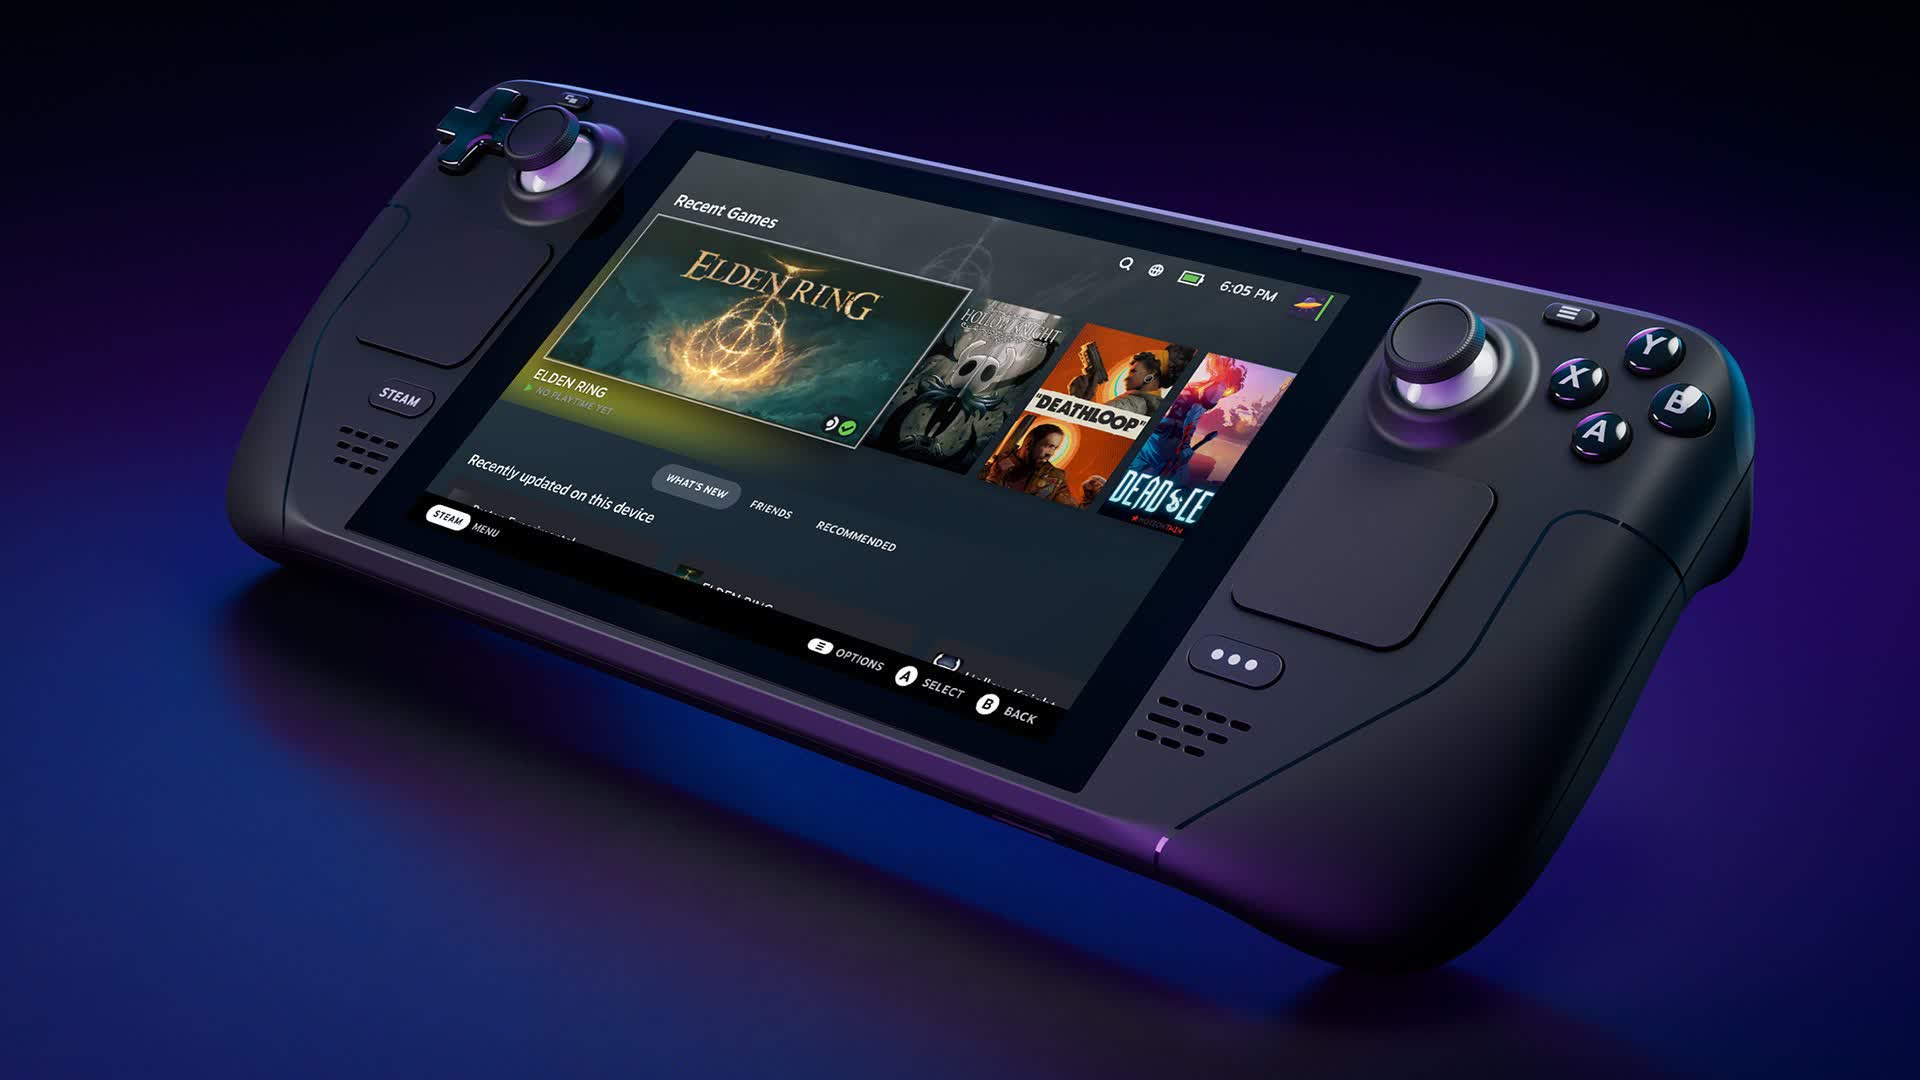 Remote Play Together comes to the Steam Deck